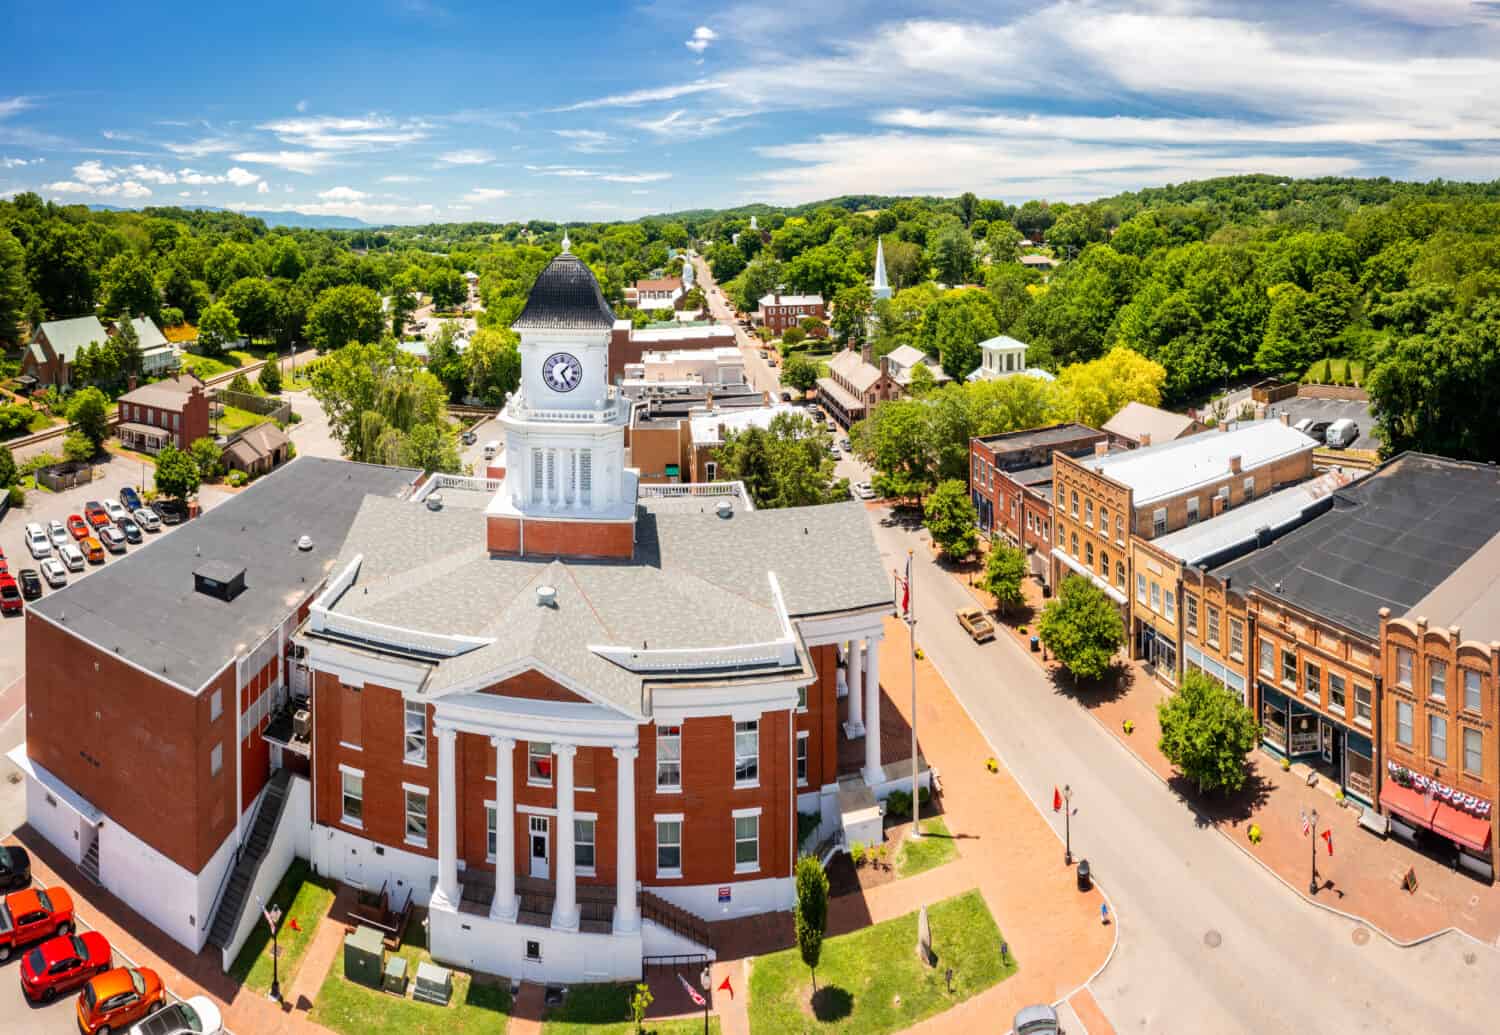 Aerial view of Tennessee's oldest town, Jonesborough and its courthouse. Jonesborough was founded in 1779 and it was the capital for the failed 14th State of the US, known as the State of Franklin